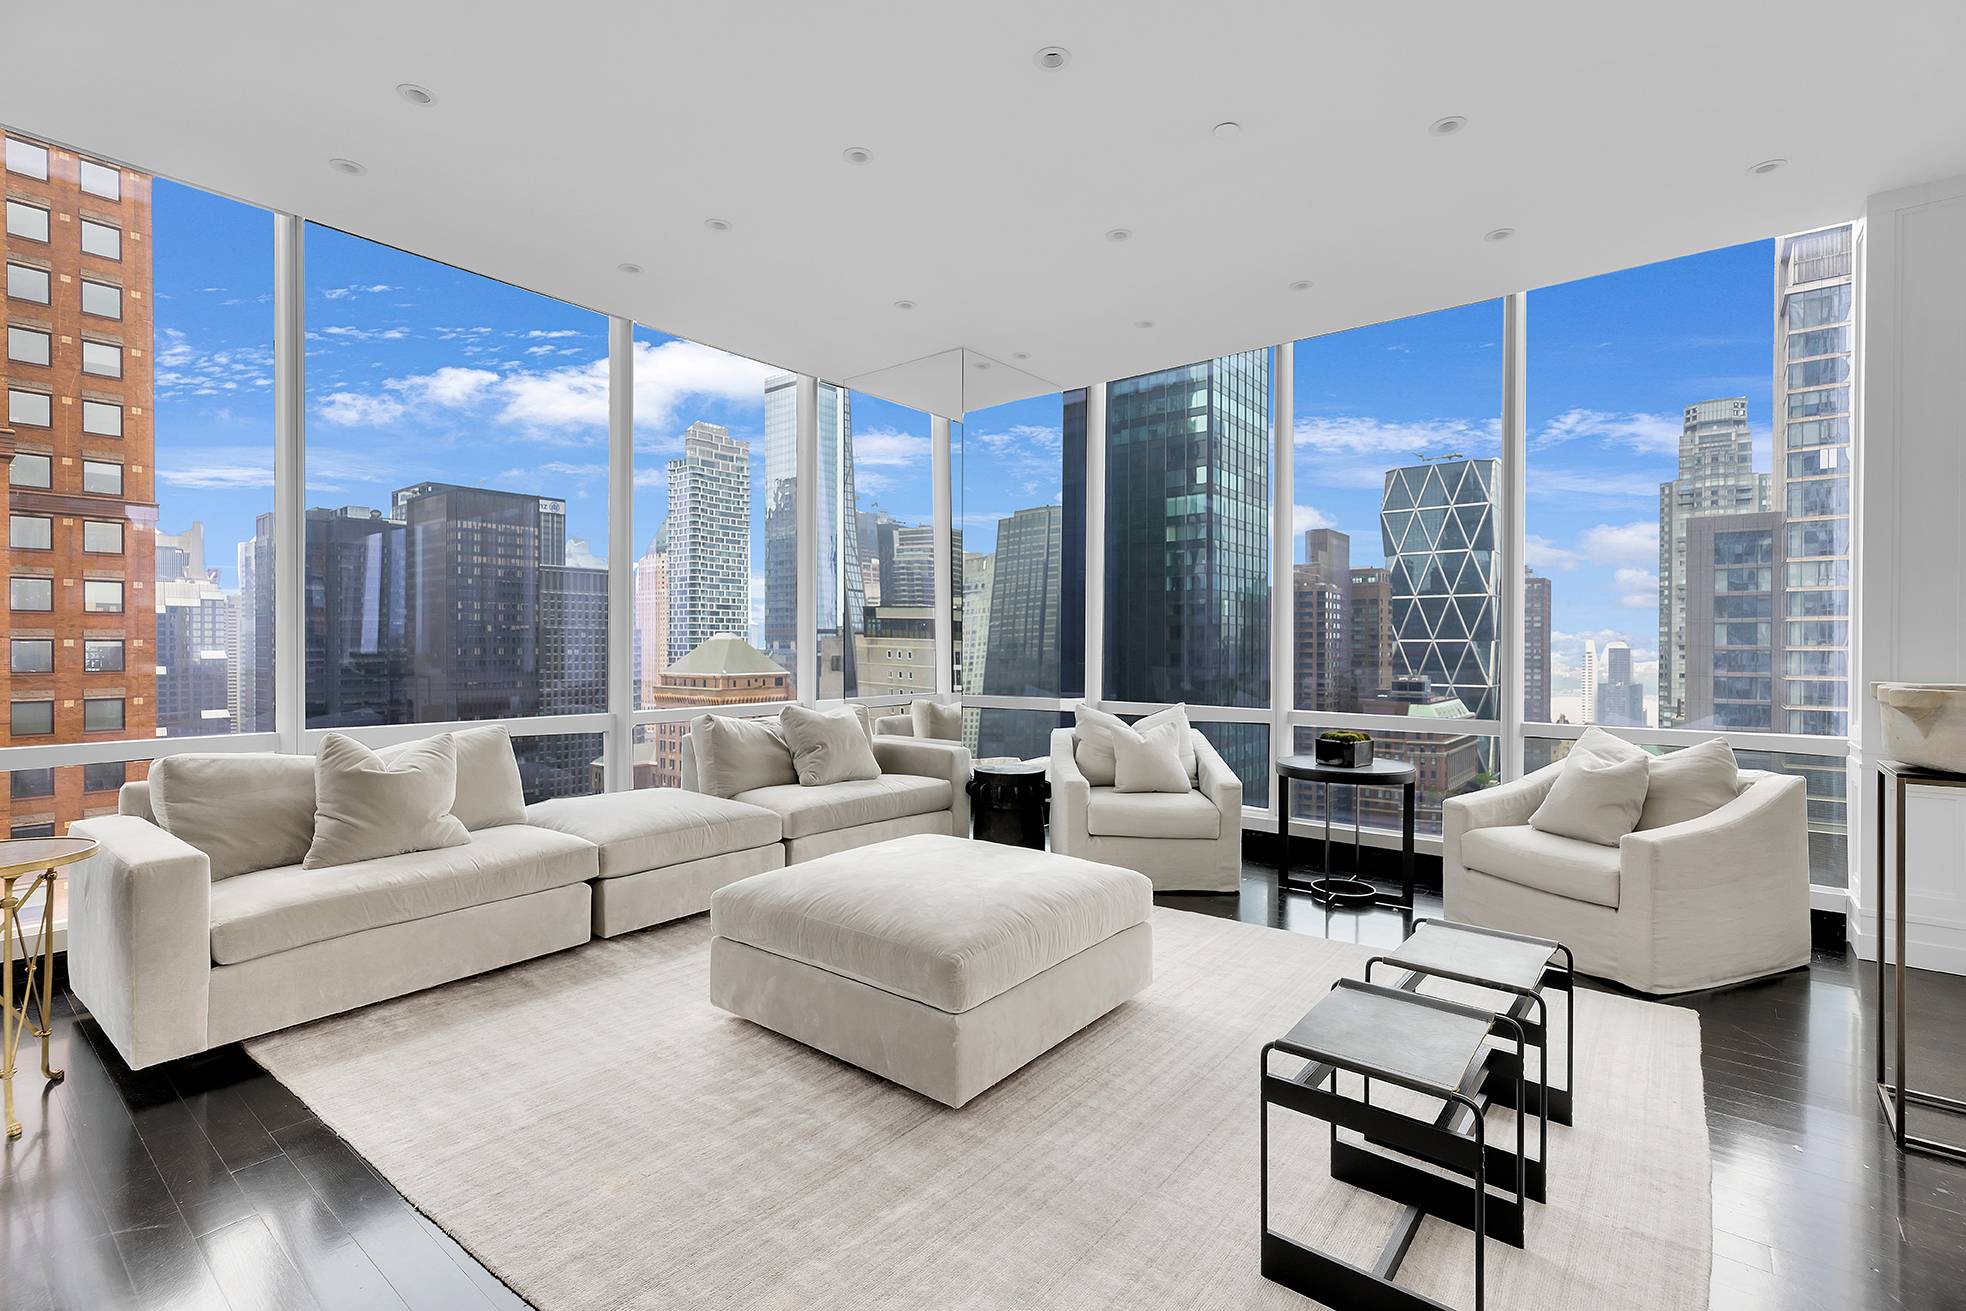 Luxury Living at The Top Of The World! 2BR/2.5BA at One57